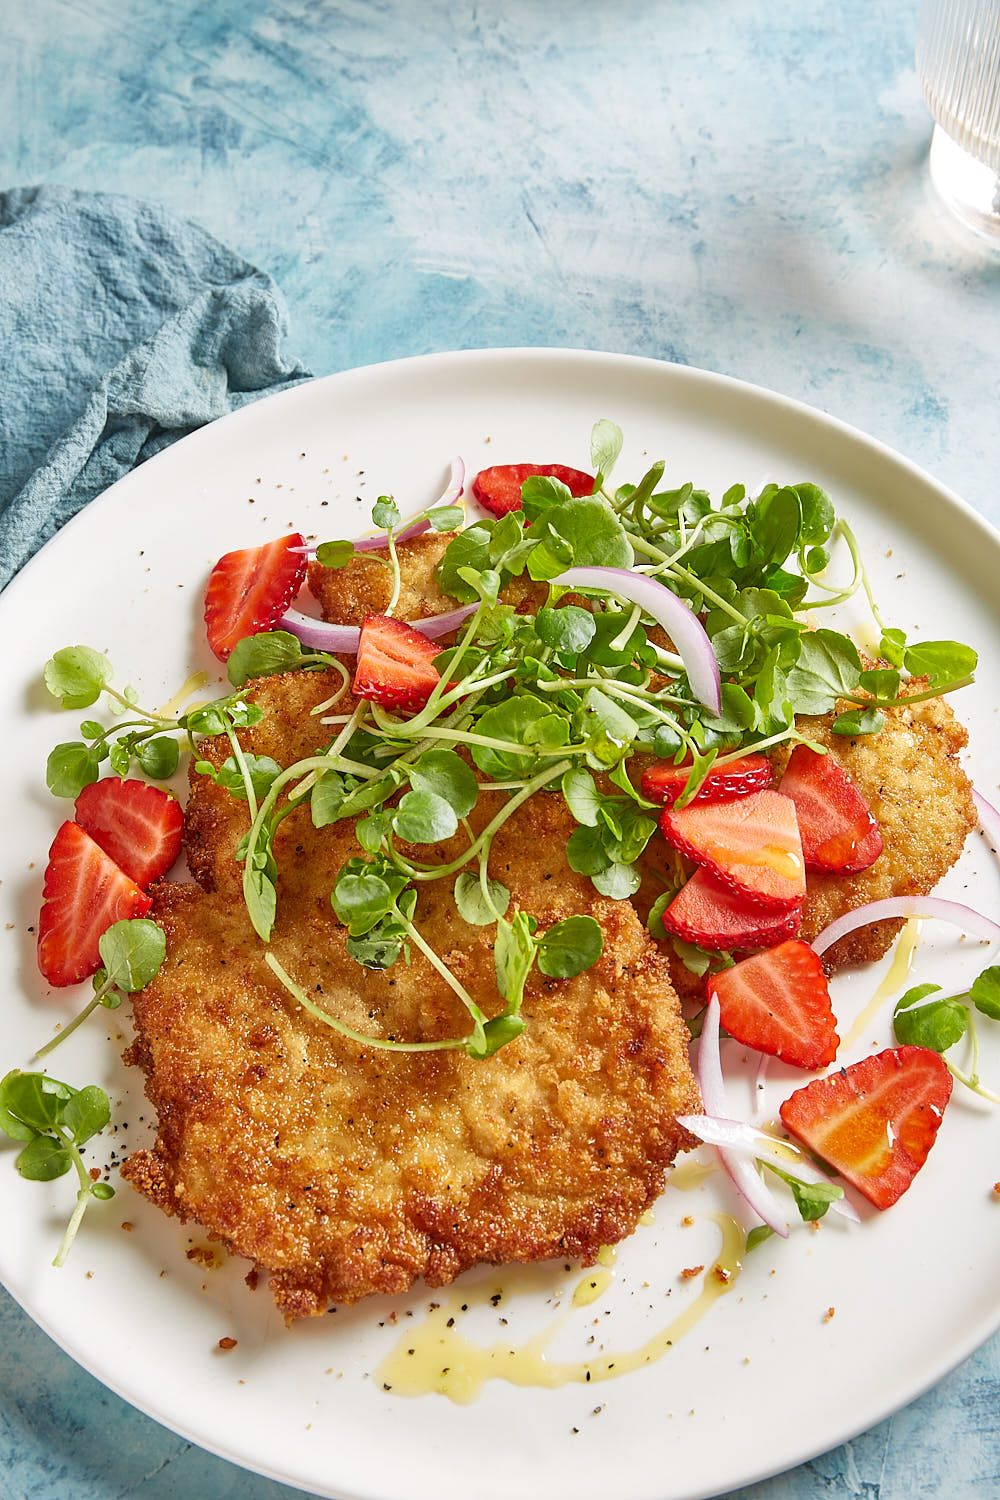 Chicken cutlet with strawberry salad and blue linen